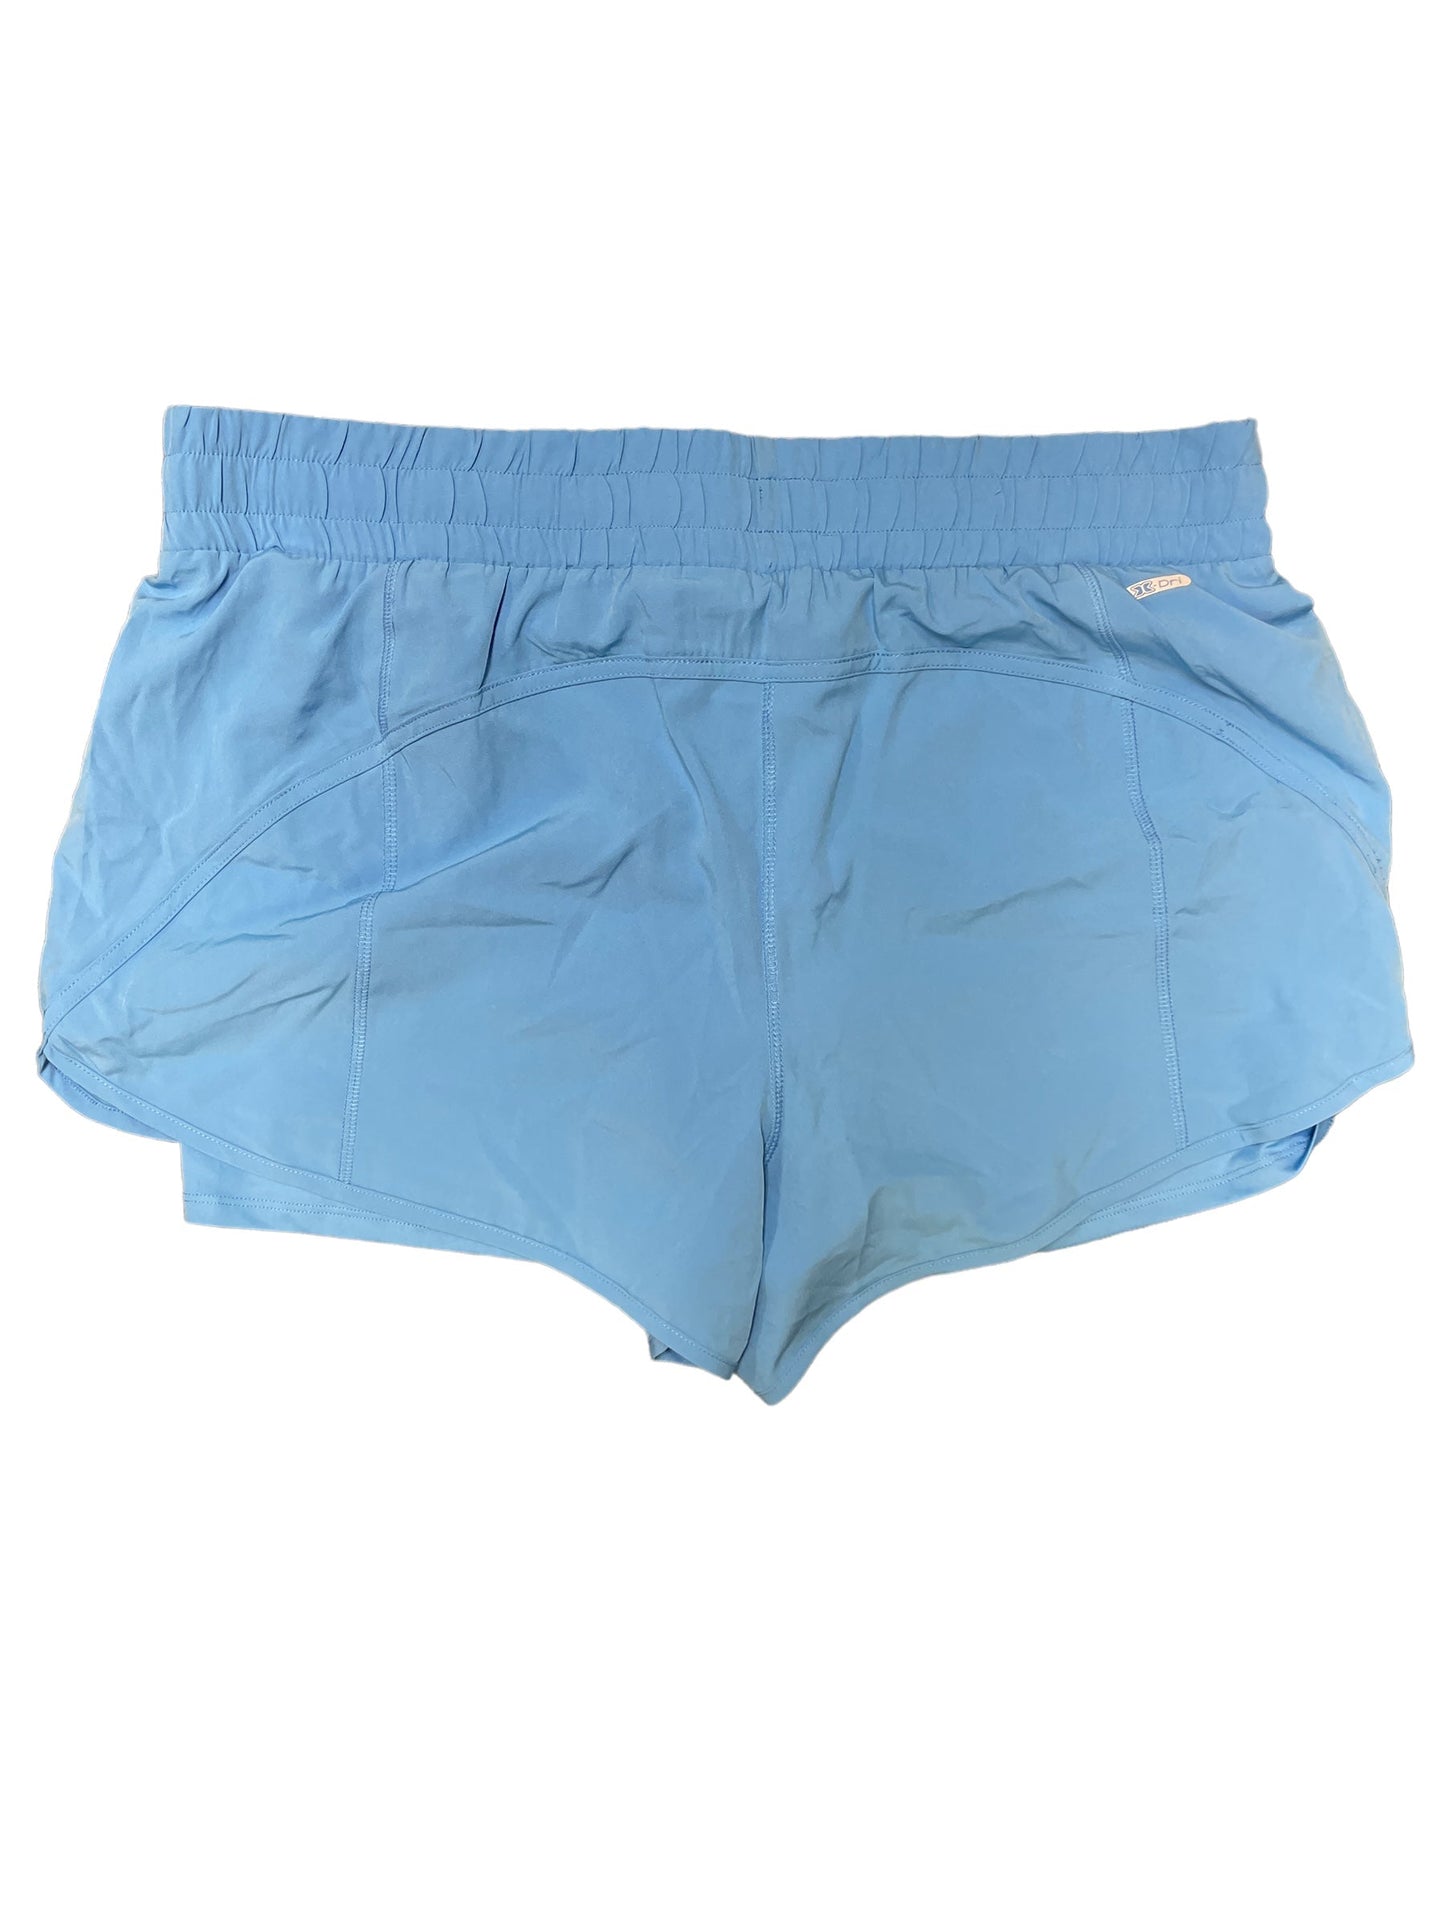 Athletic Shorts By Rbx  Size: 2x